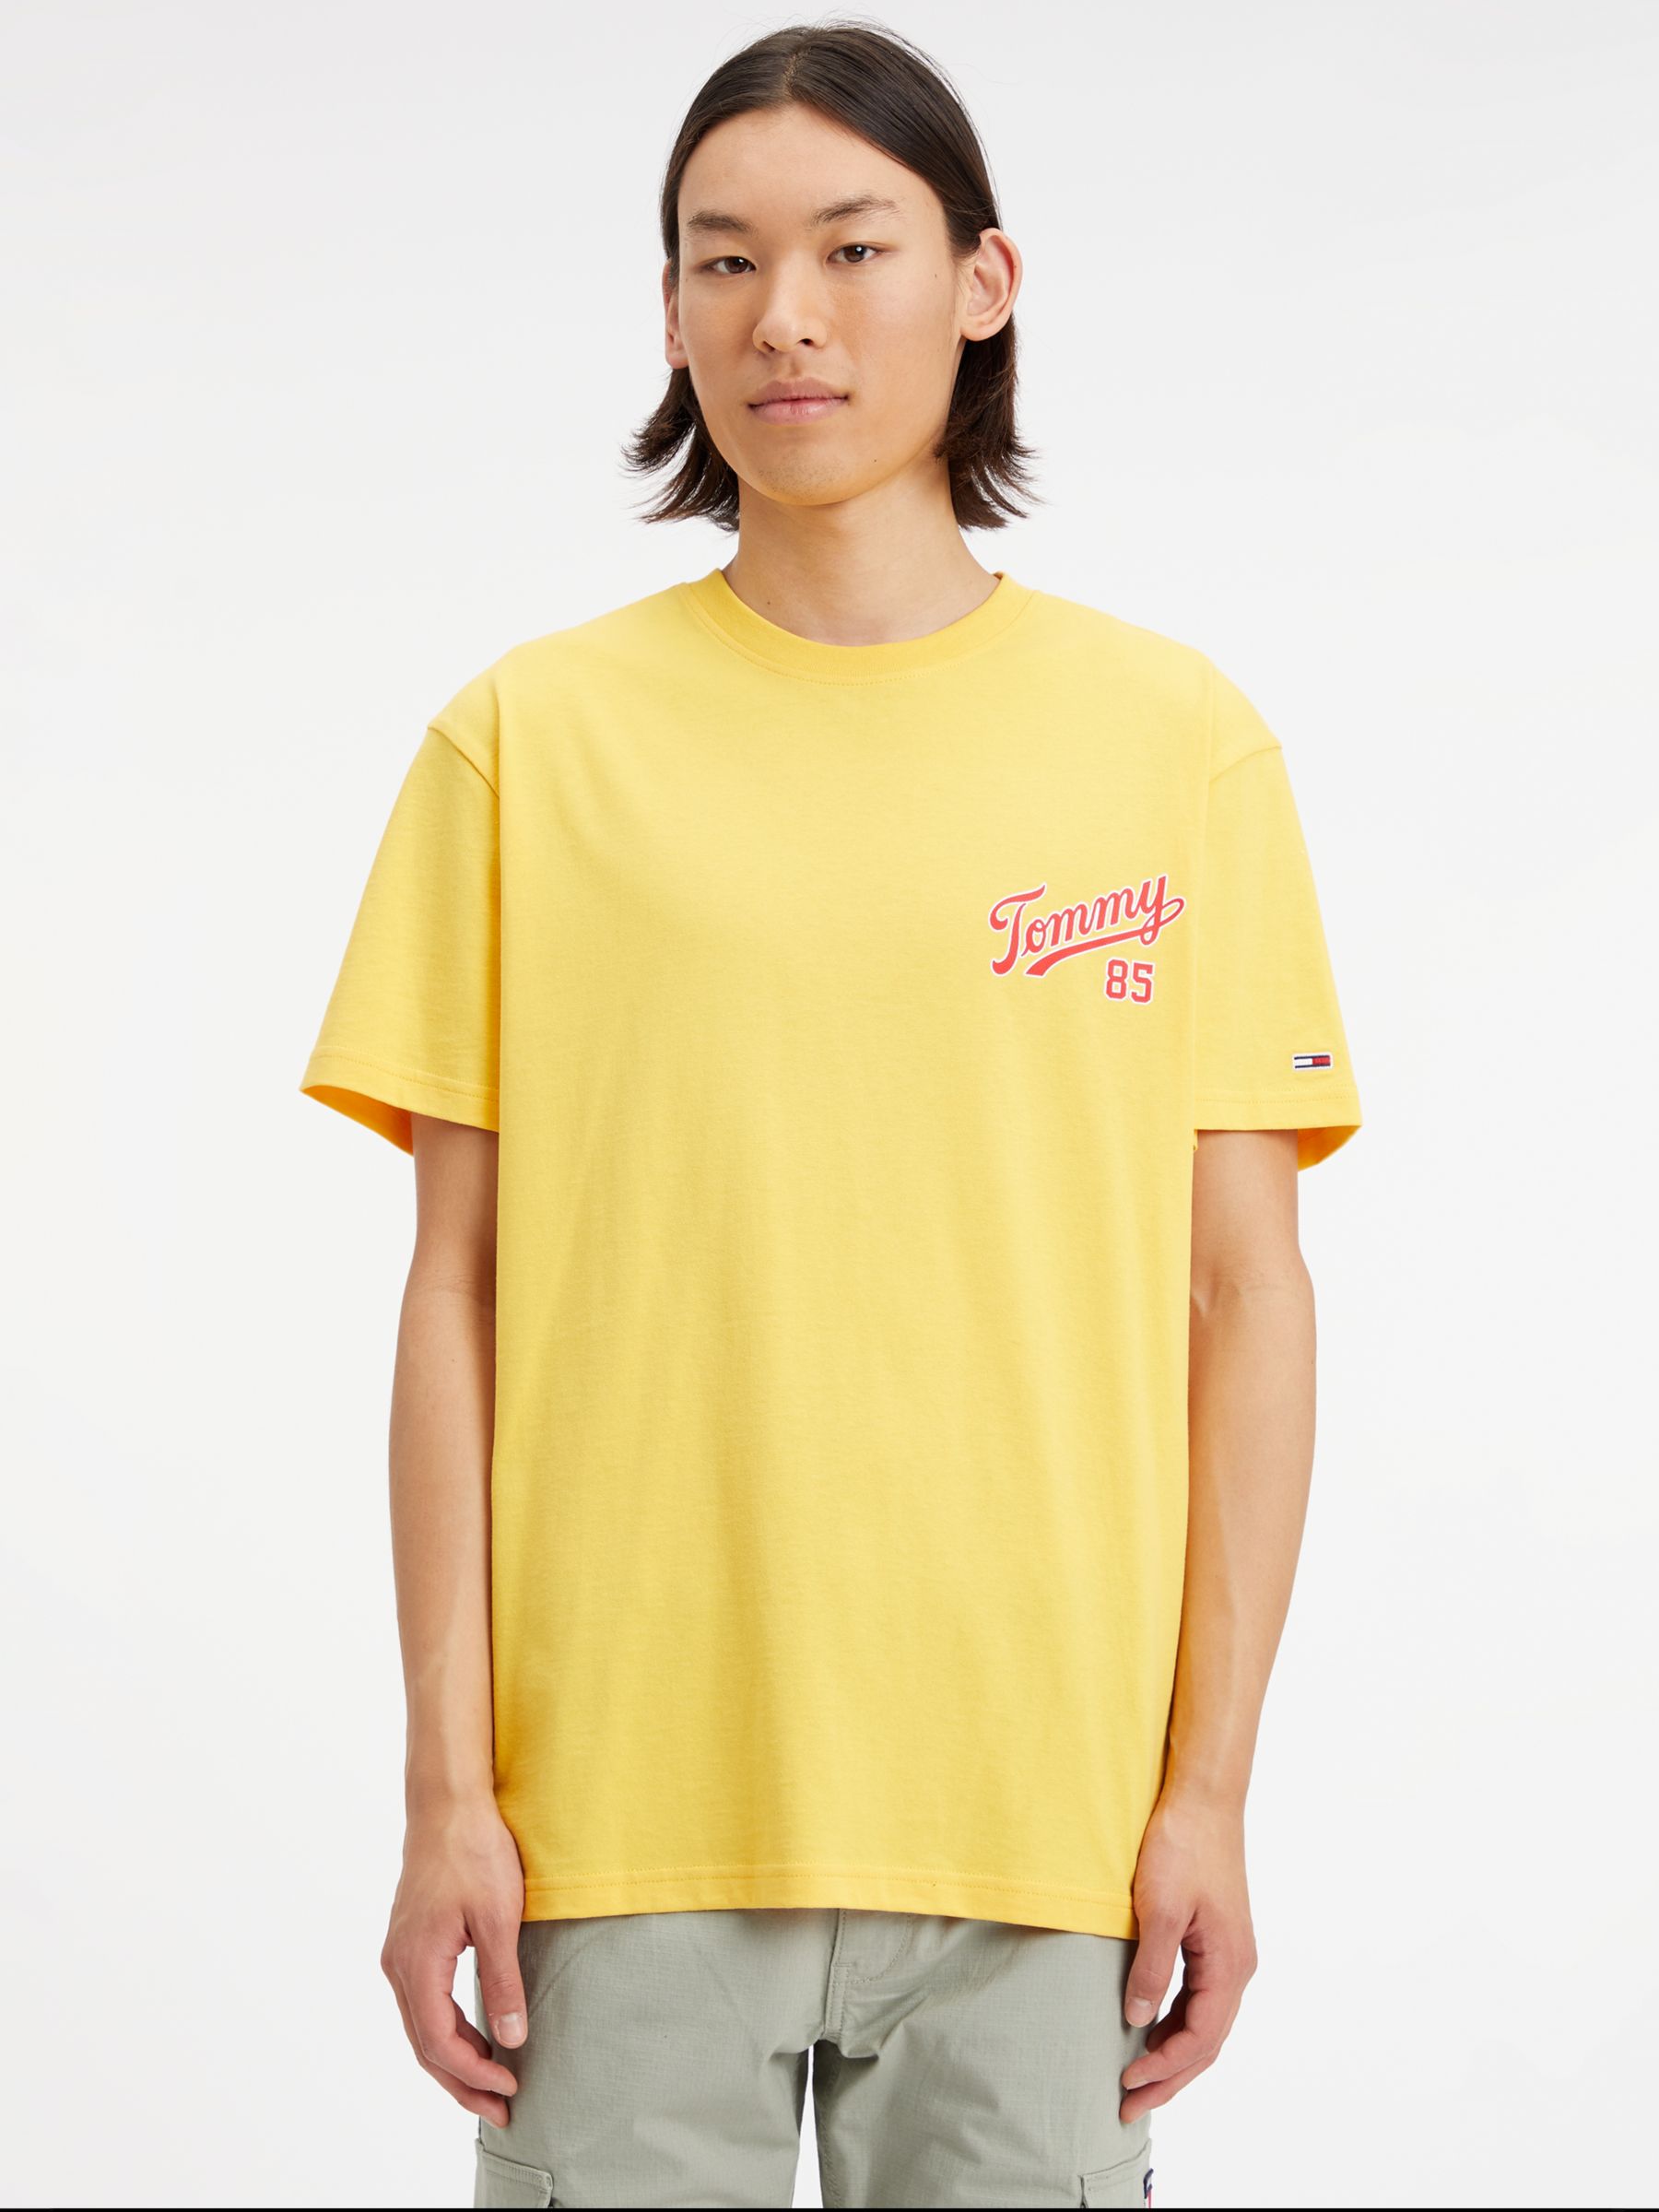 Organic Tommy Jeans Warm John Logo at Lewis Cotton 85 T-Shirt, Partners & College Yellow